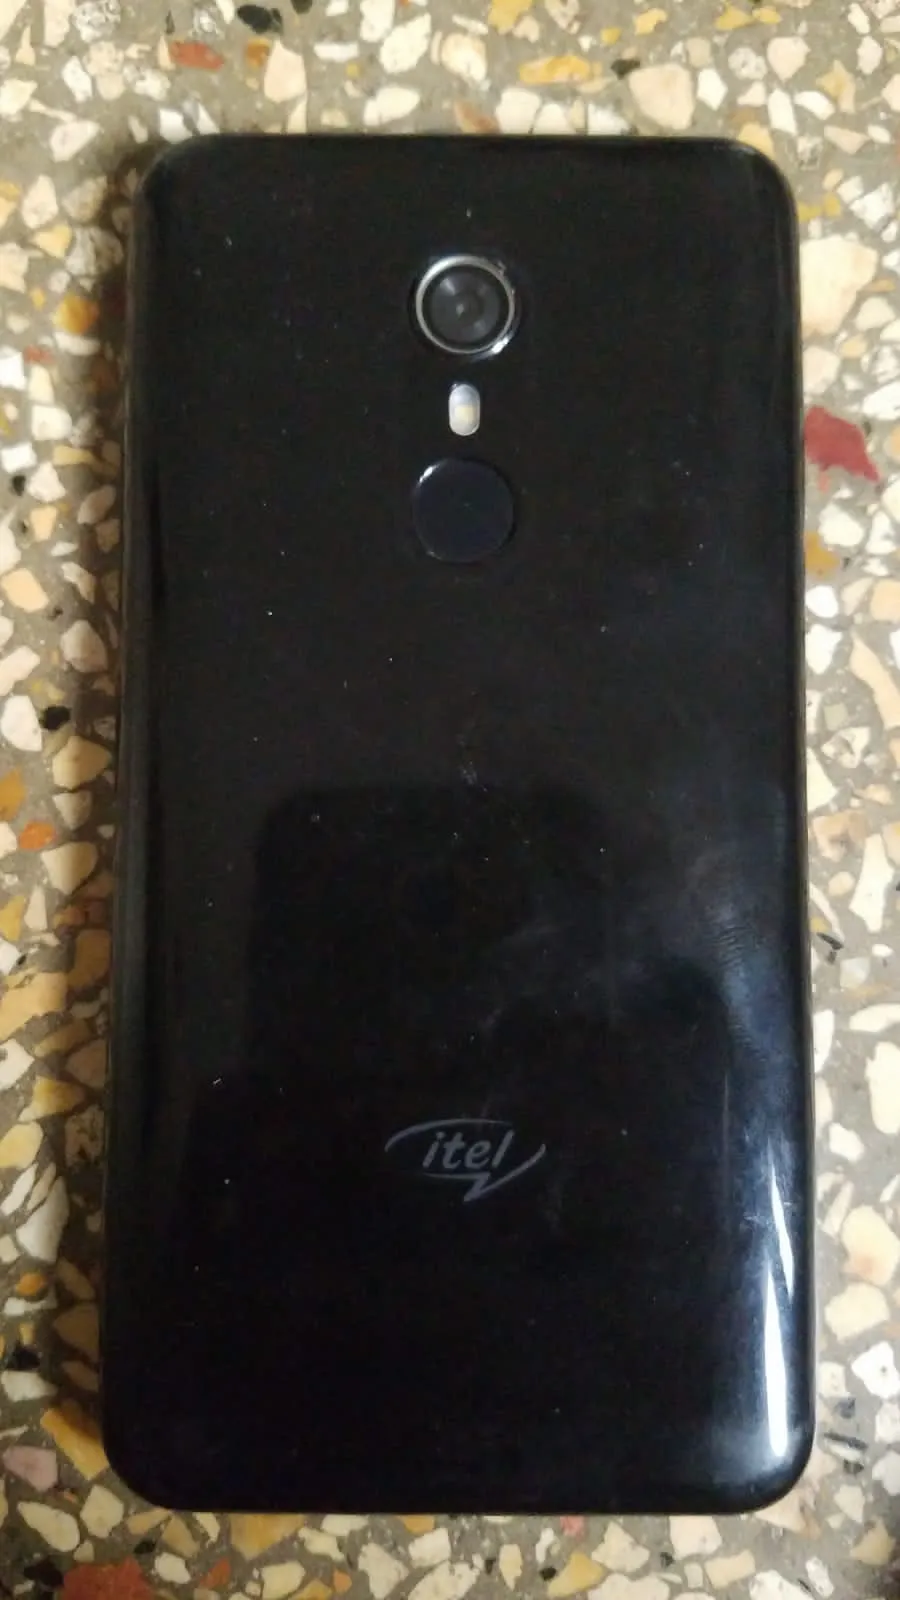 Itel a33 for sale in reasonable price also exchange possible - photo 3